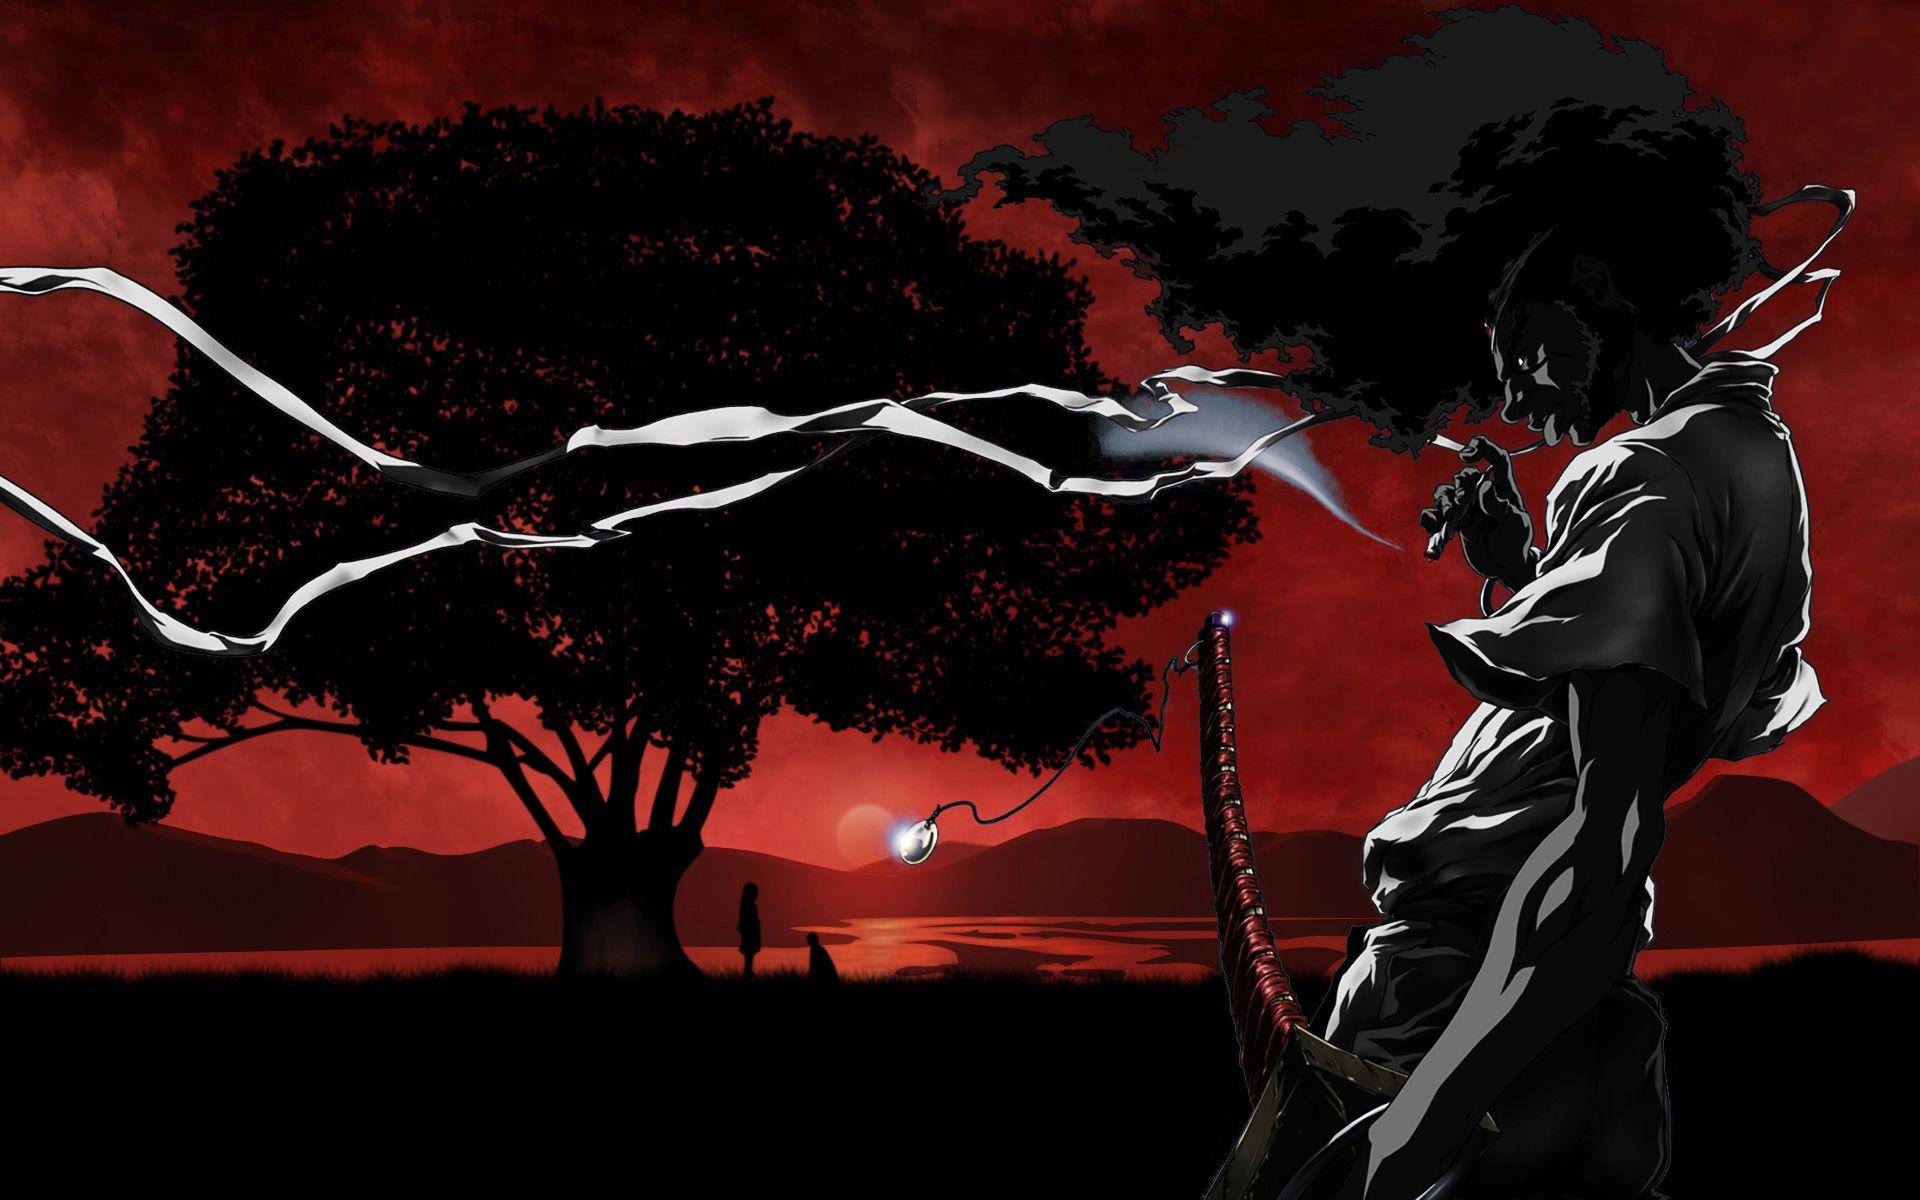 Afro Samurai image Afro HD wallpaper and background photo